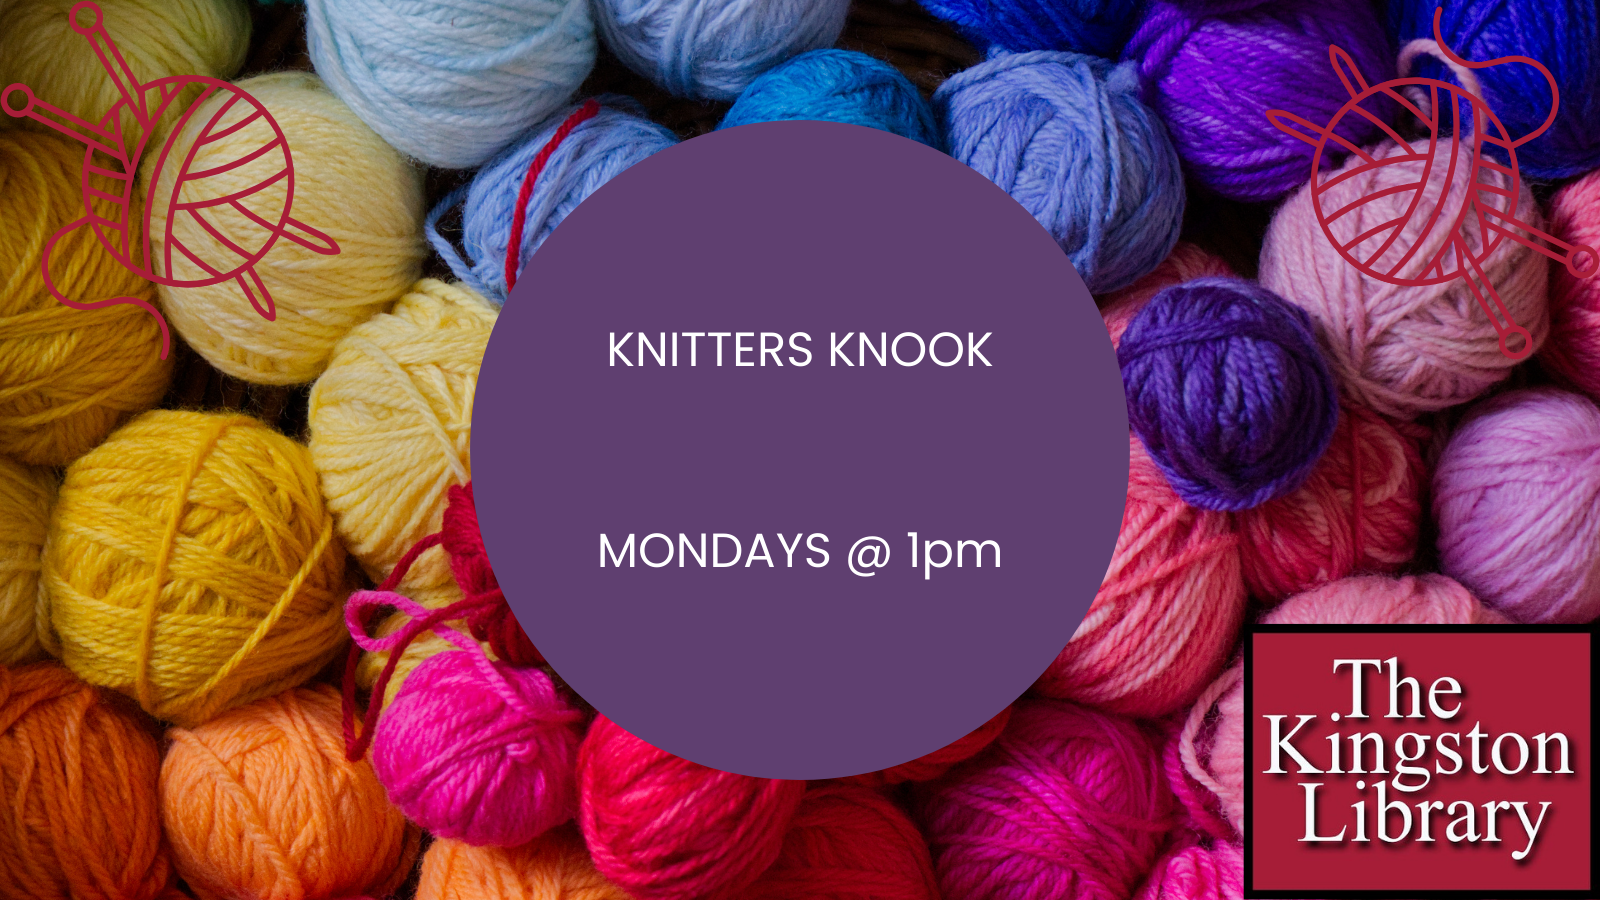 Knitters Knook